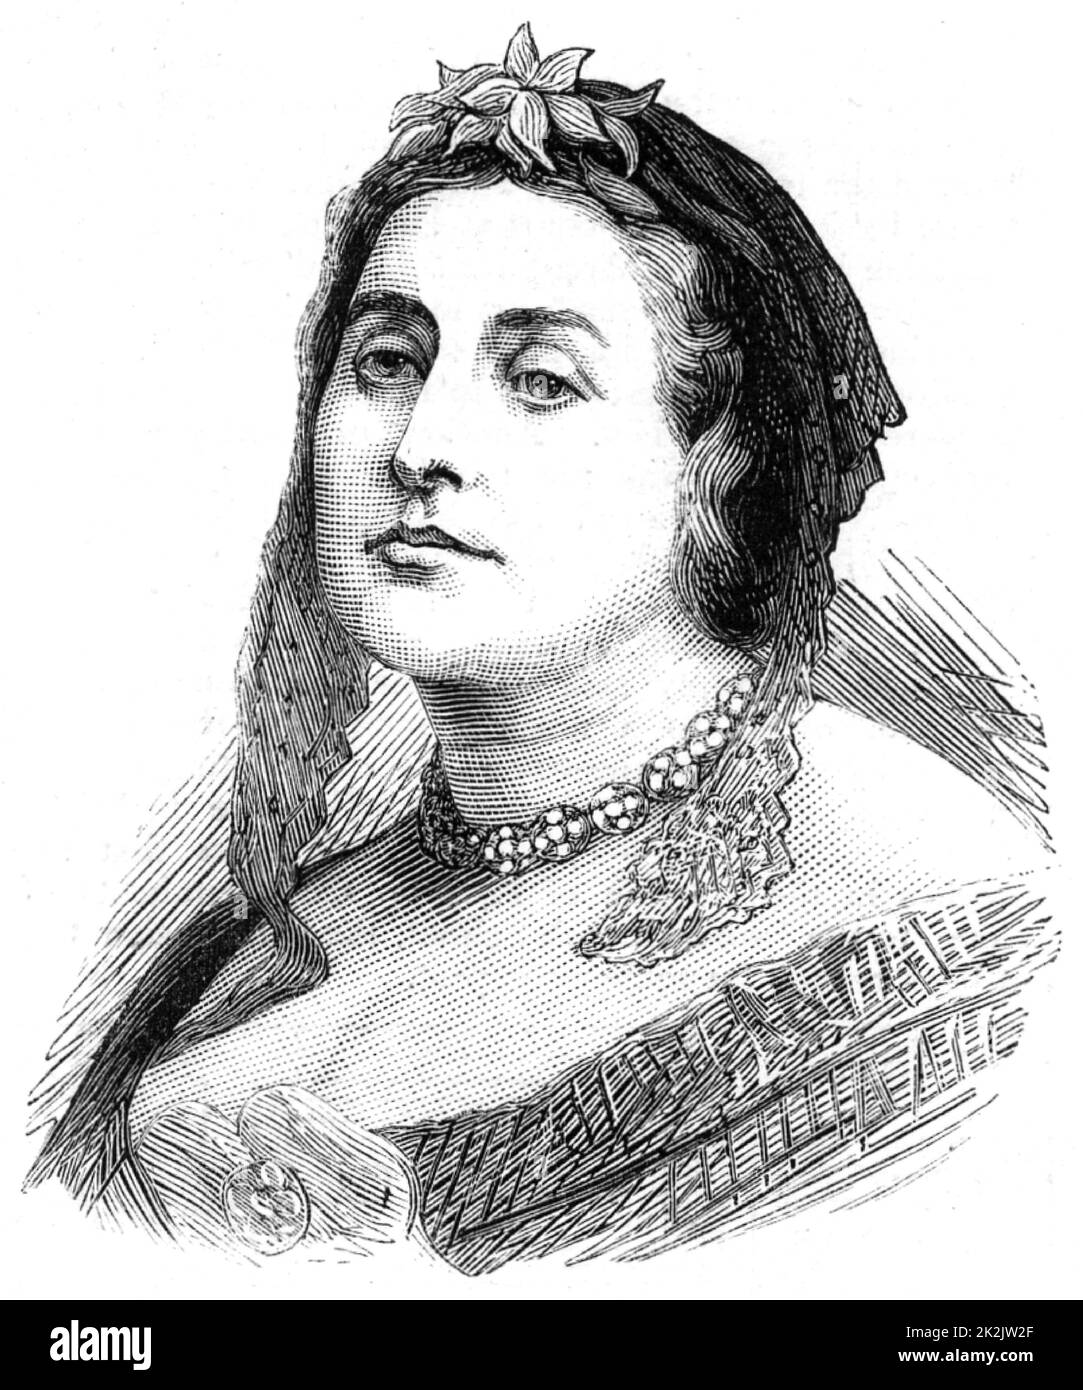 Caroline Elizabeth Sarah Norton (born Sheridan - 1808-1877) English poet, novelist and pamphleteer. Because of abuse by her husband, she campaigned for rights of women in marriage. Heroine of the novel by George Meredith 'Diana of the Crossways' 1885 based on Caroline's life. Engraving 1877. Stock Photo